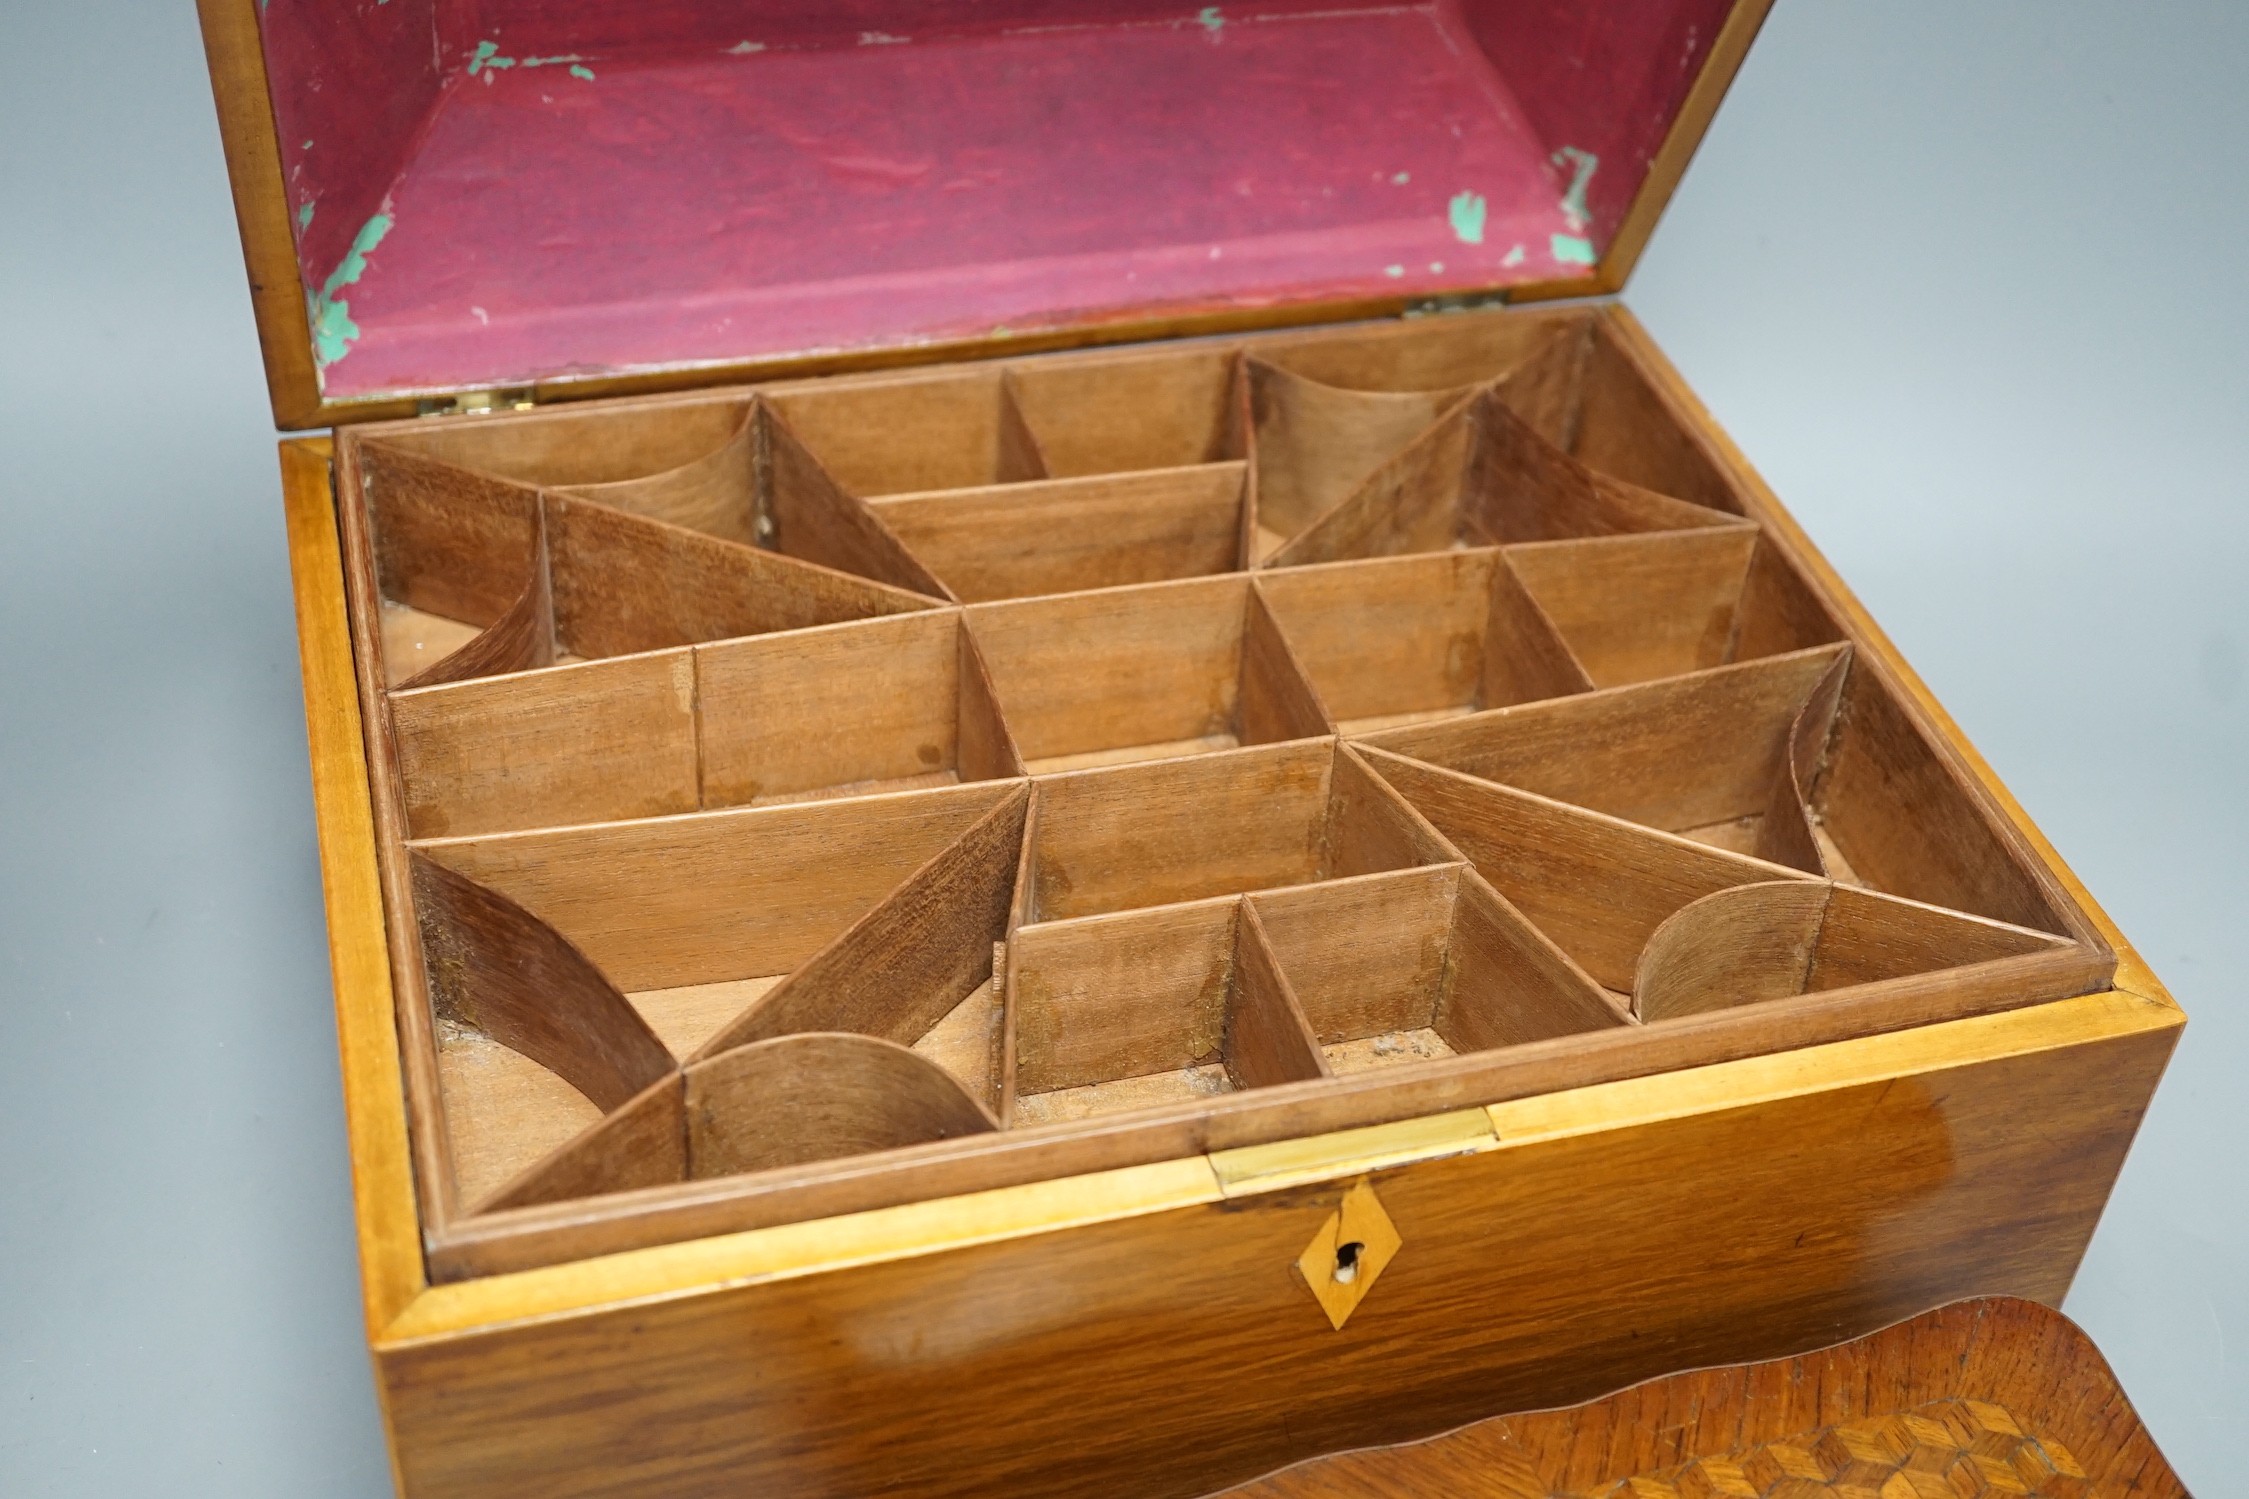 A 19th century partridge-wood and coromandel banded sewing box, together with a French parquetry kingwood jewellery box, with turned bone feet, largest 32cm wide